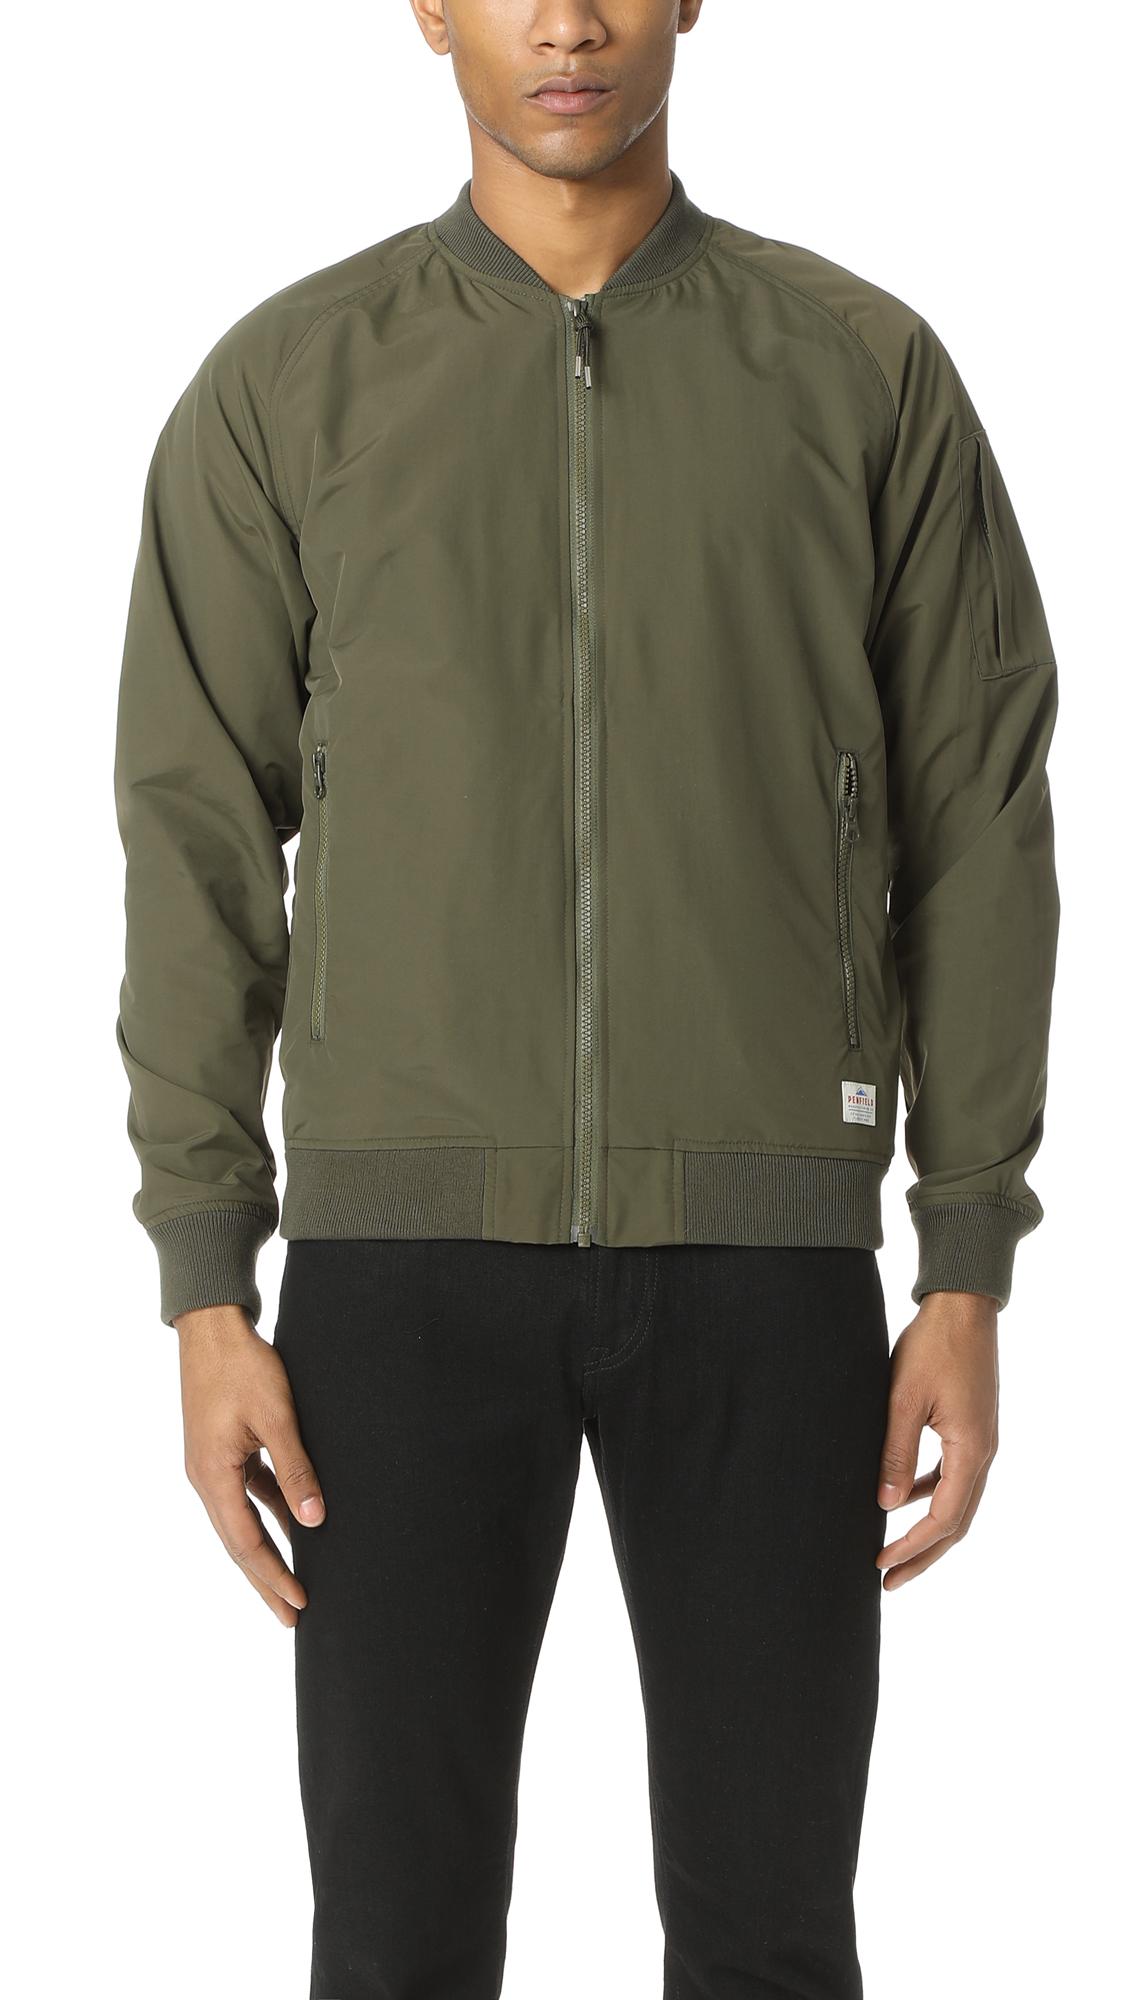 Penfield Synthetic Okenfield Jacket in Olive (Green) for Men - Lyst